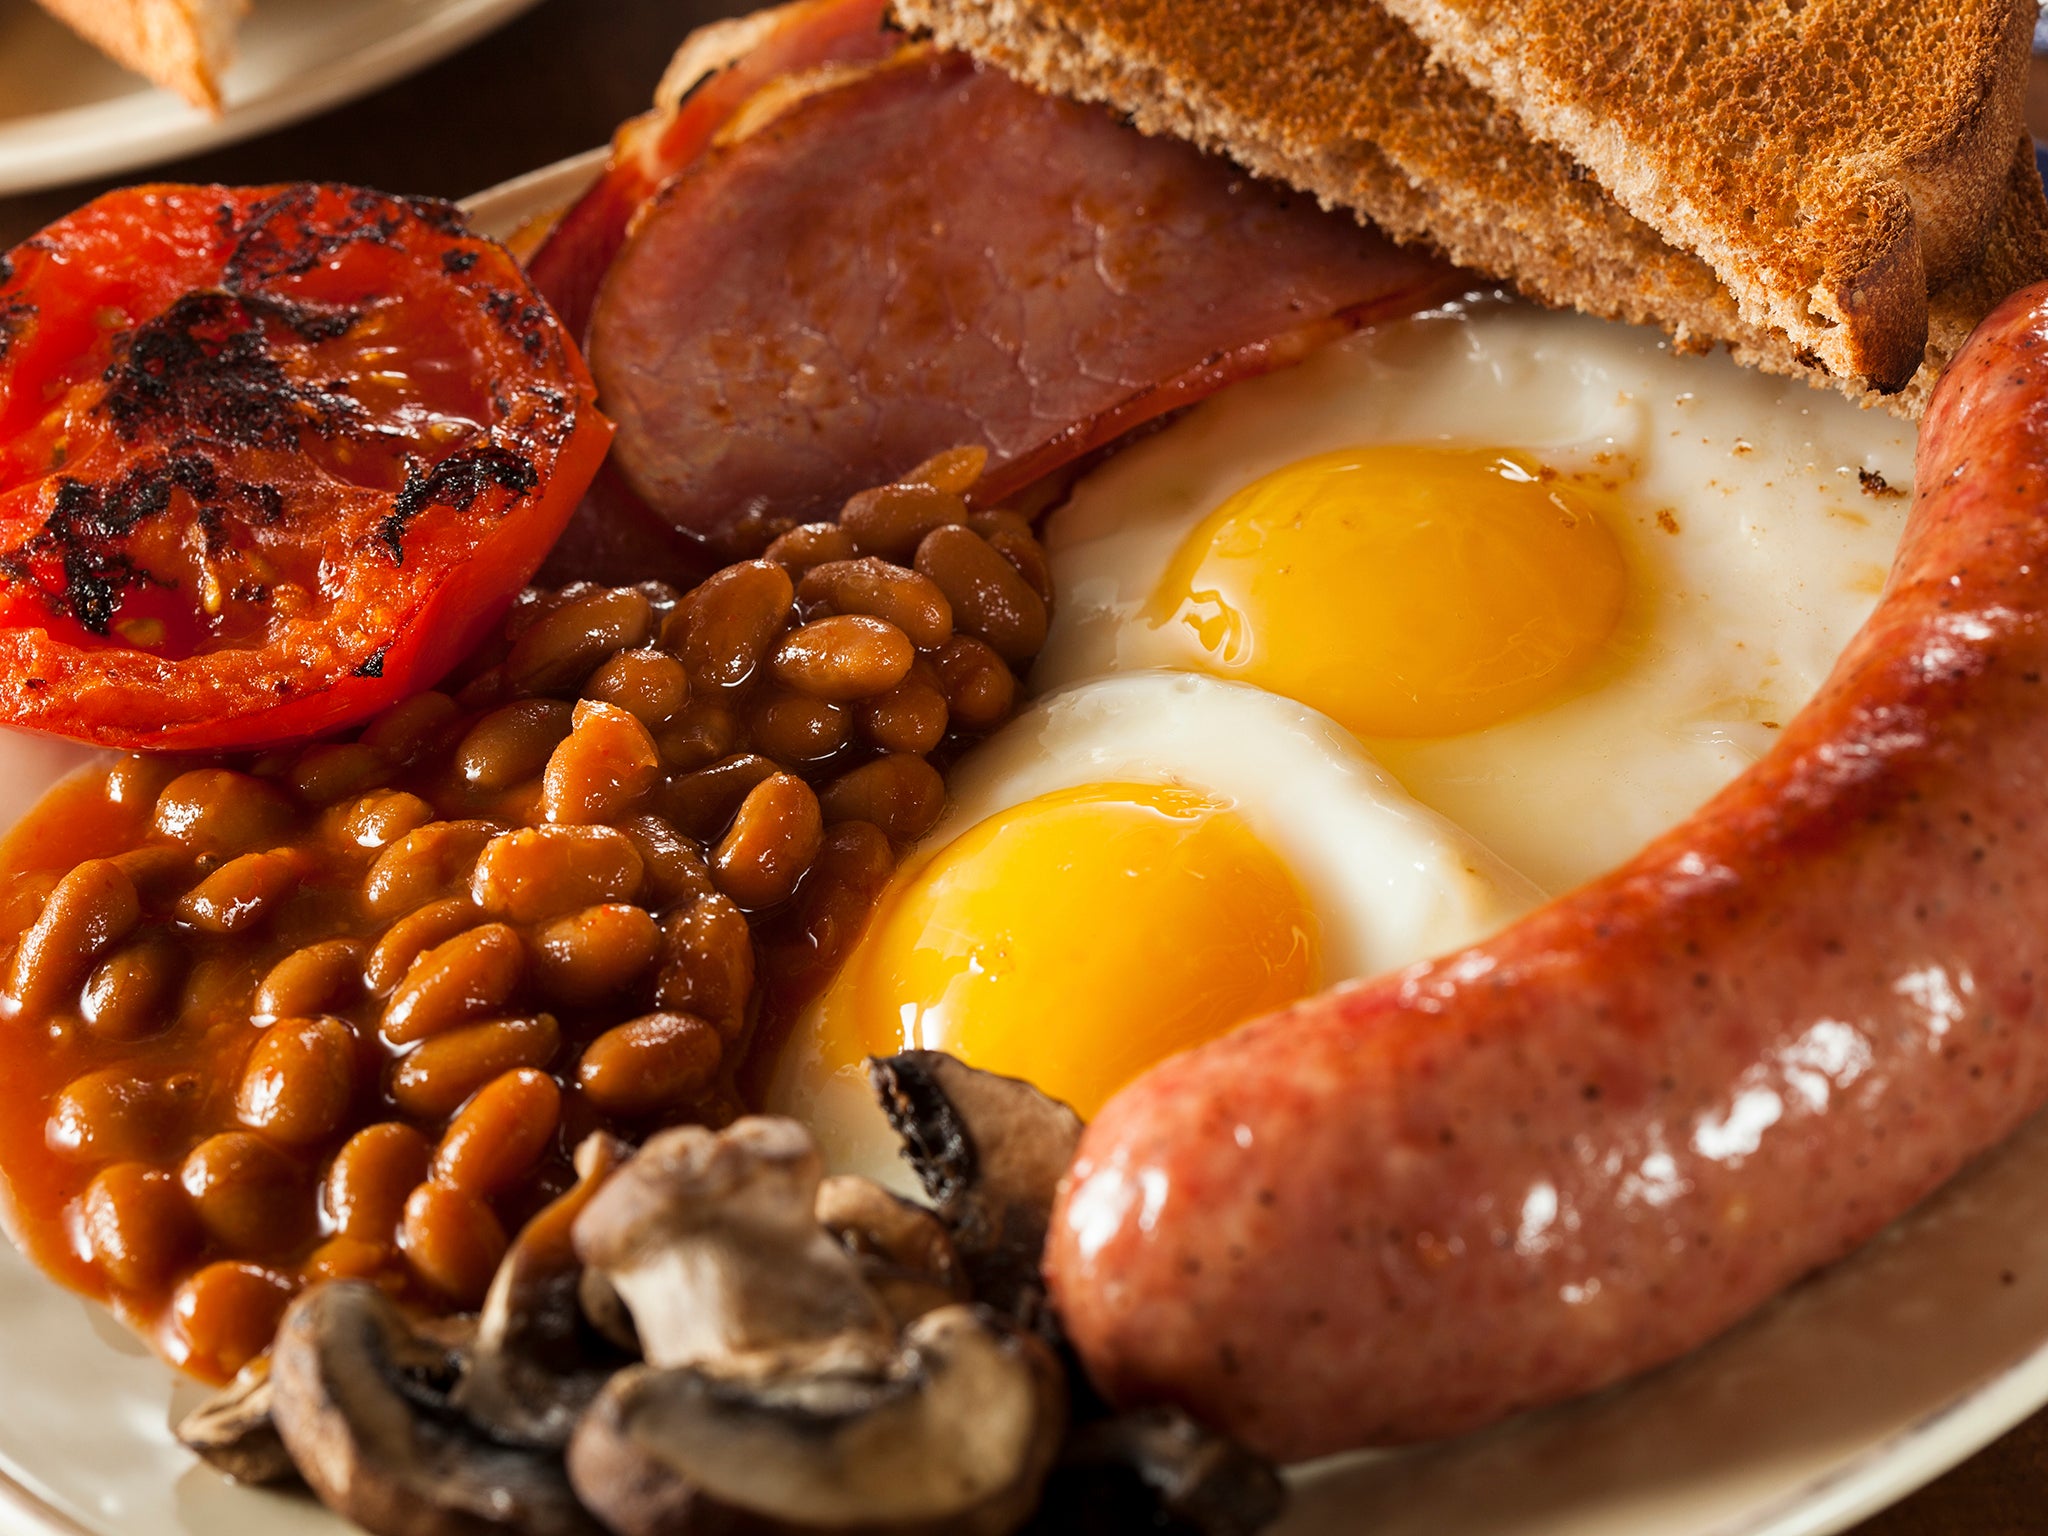 The fry up is changing shape, with young people opting for scrambled eggs and no bacon